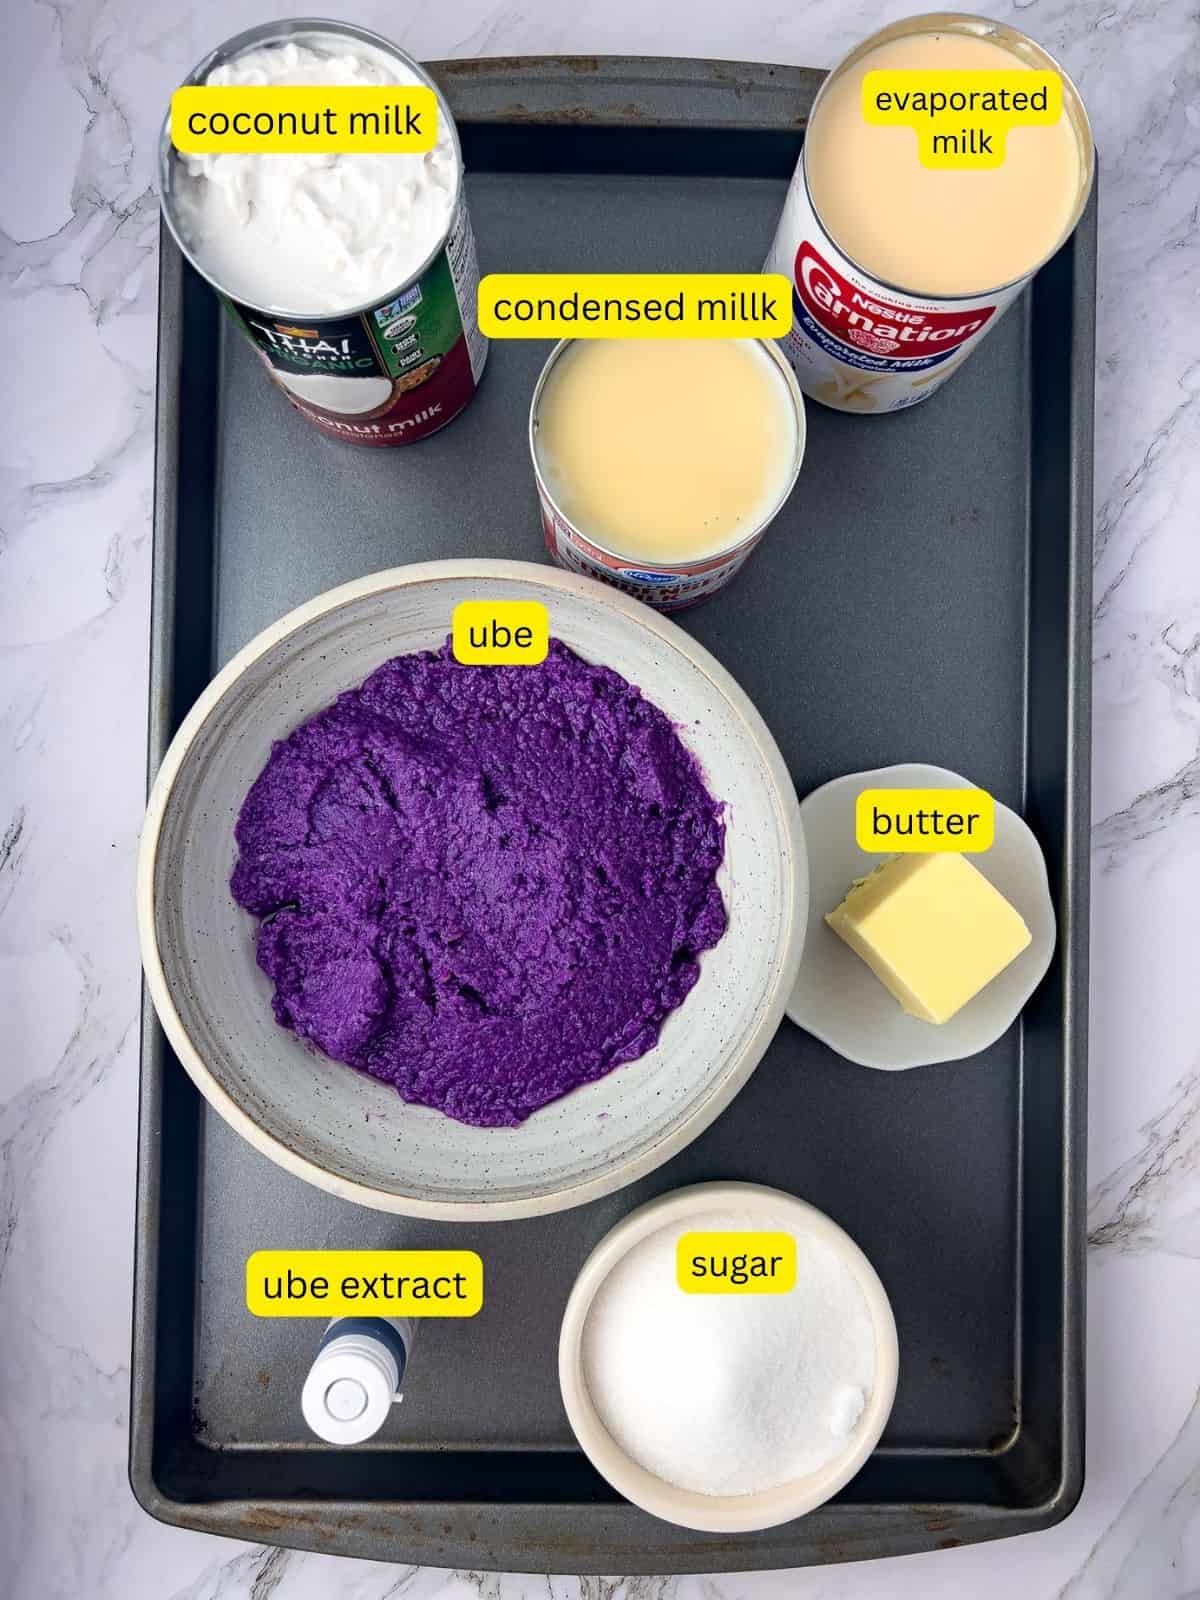 Ingredients for ube halaya jam recipe including butter, sugar, ube extract, condensed, evaporated and coconut milk.